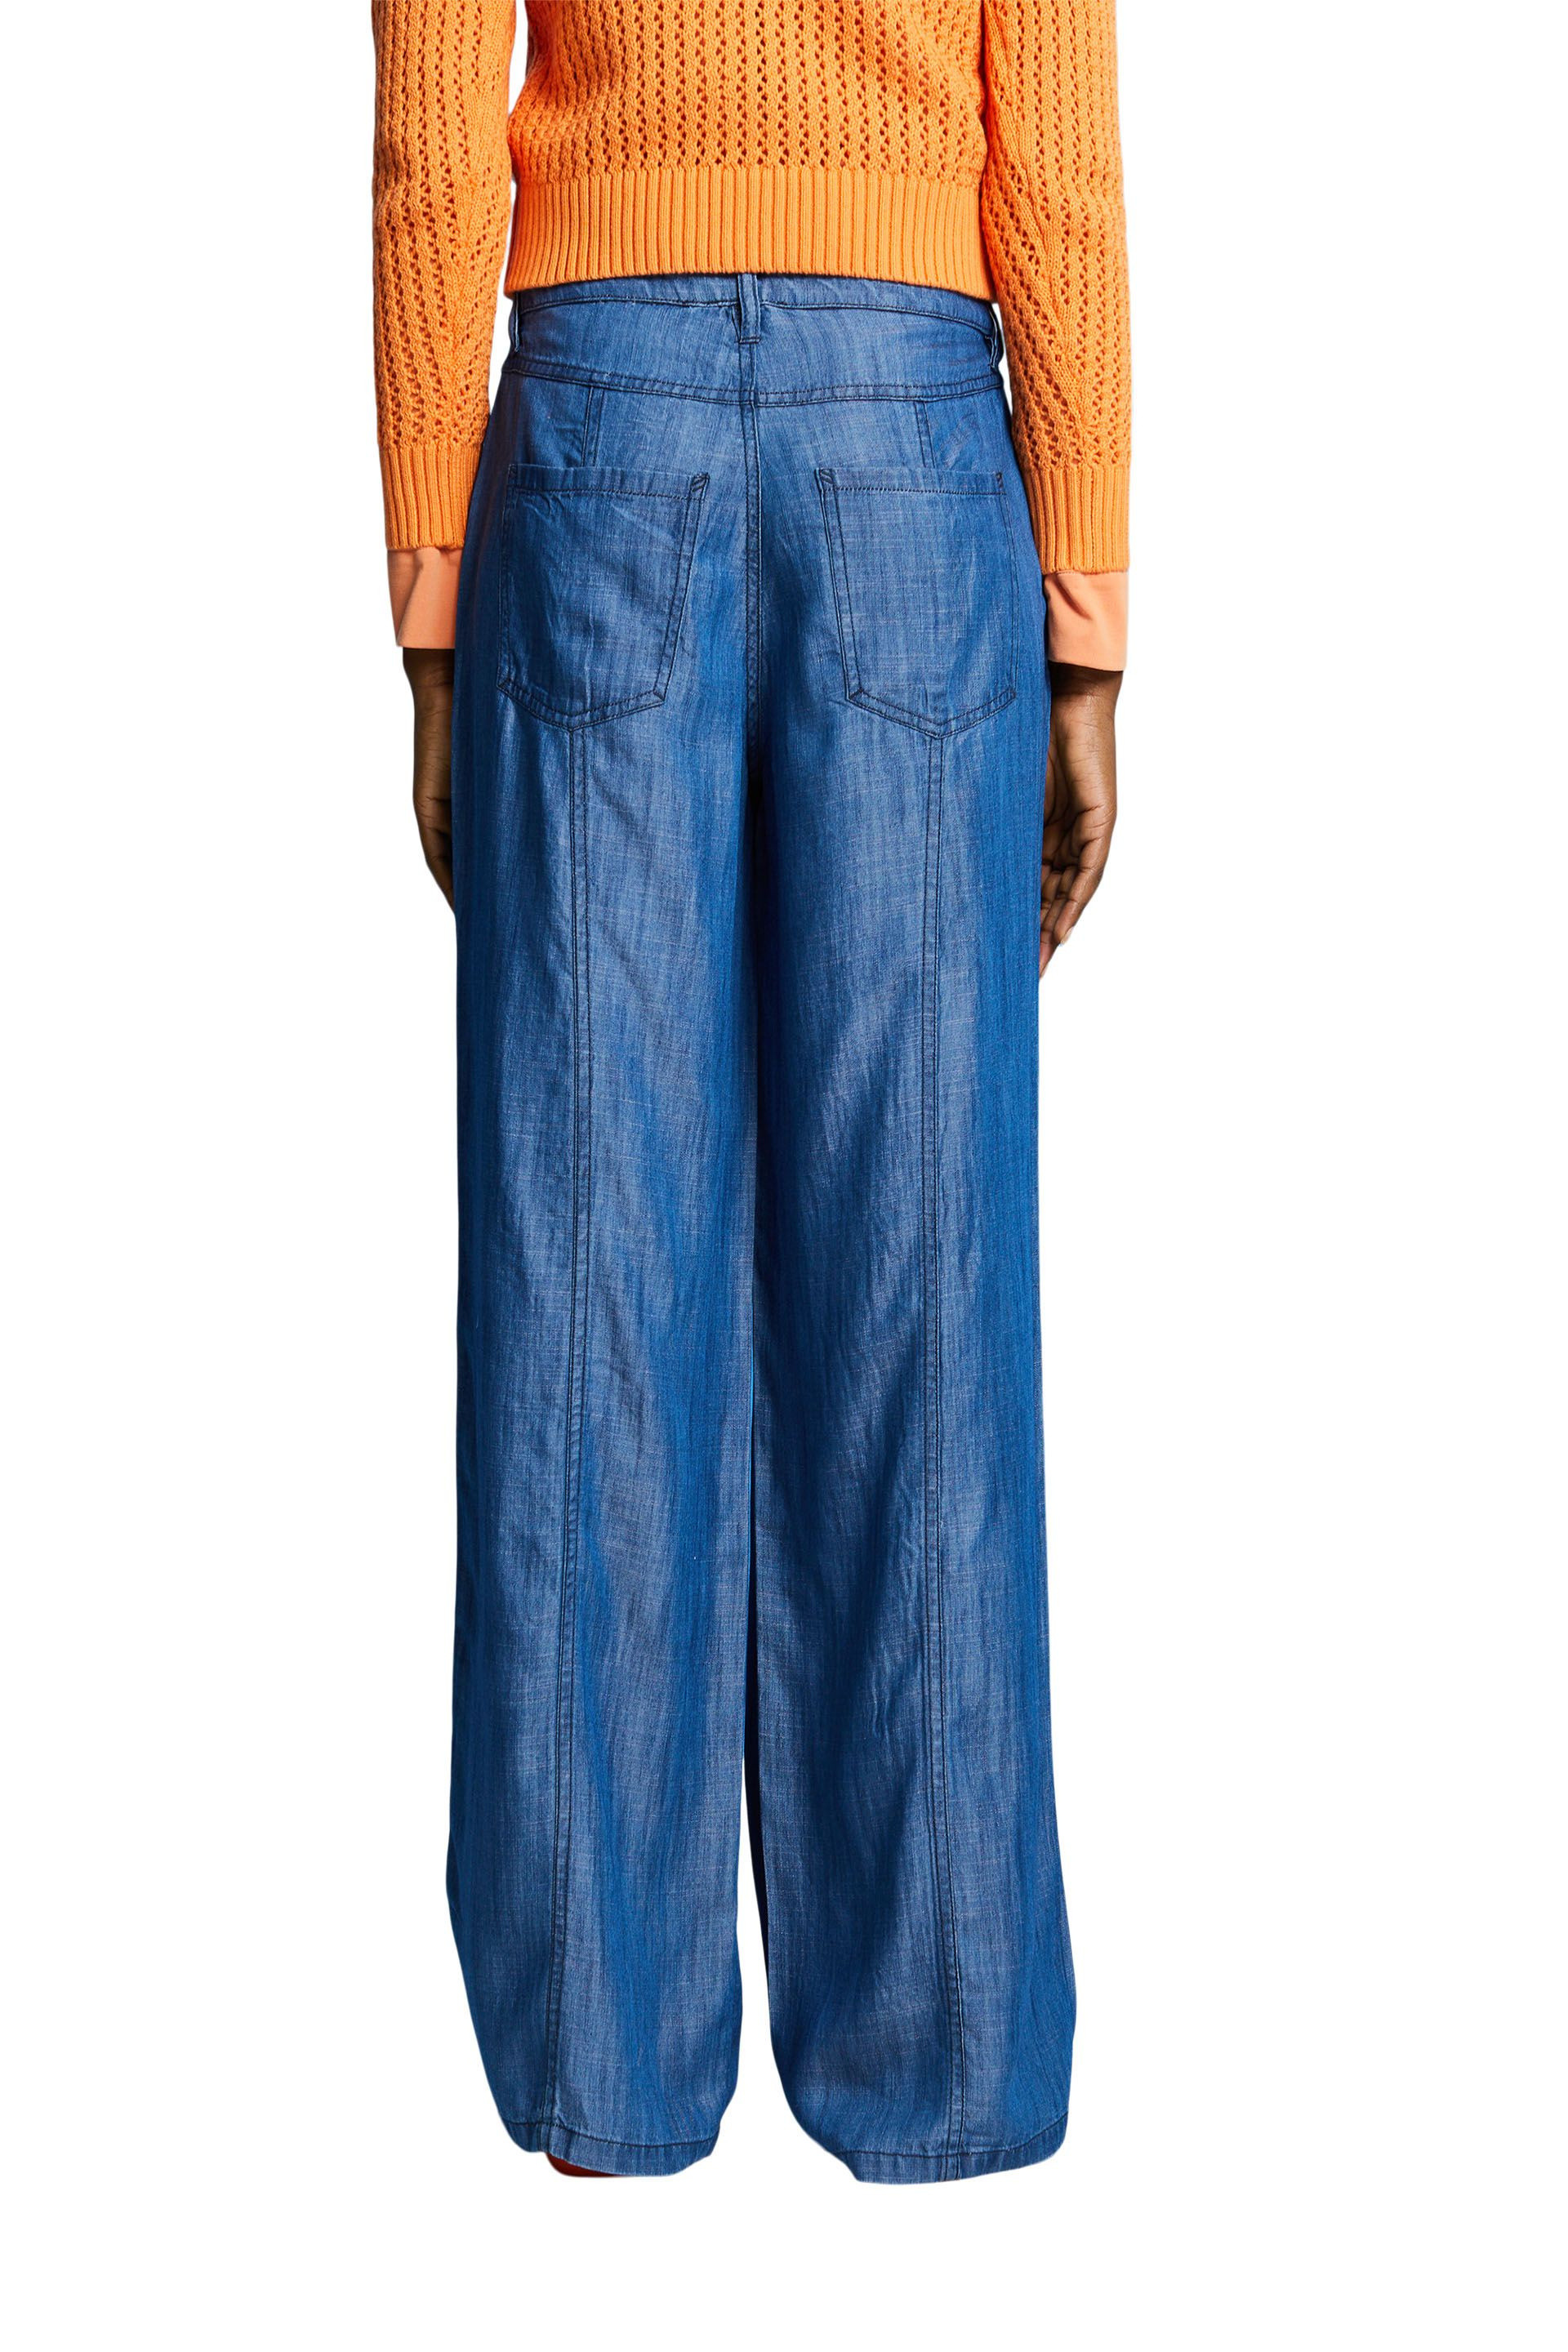 Esprit - Wide leg trousers and high waist, Denim, large image number 3